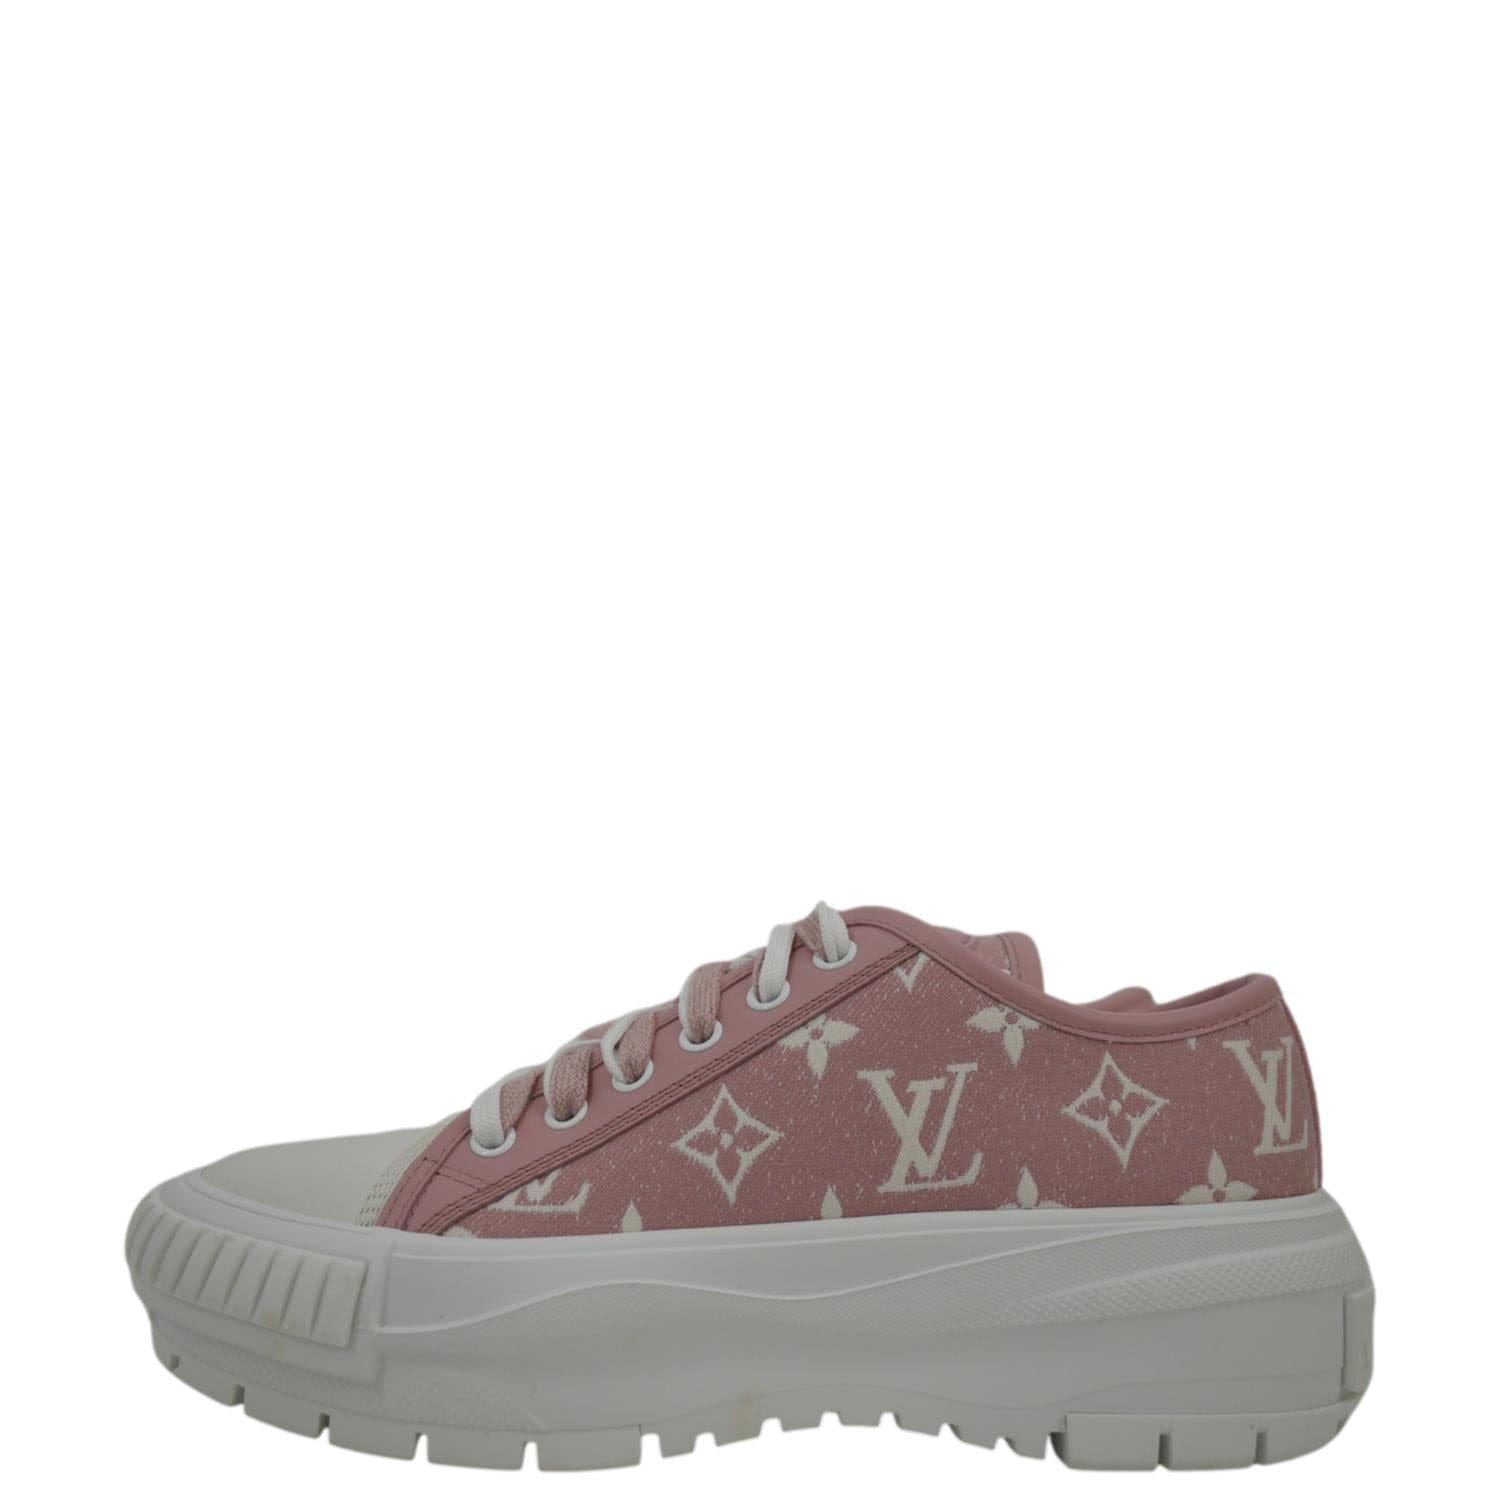 Louis Vuitton sneakers in black monogram canvas, taille 7, new